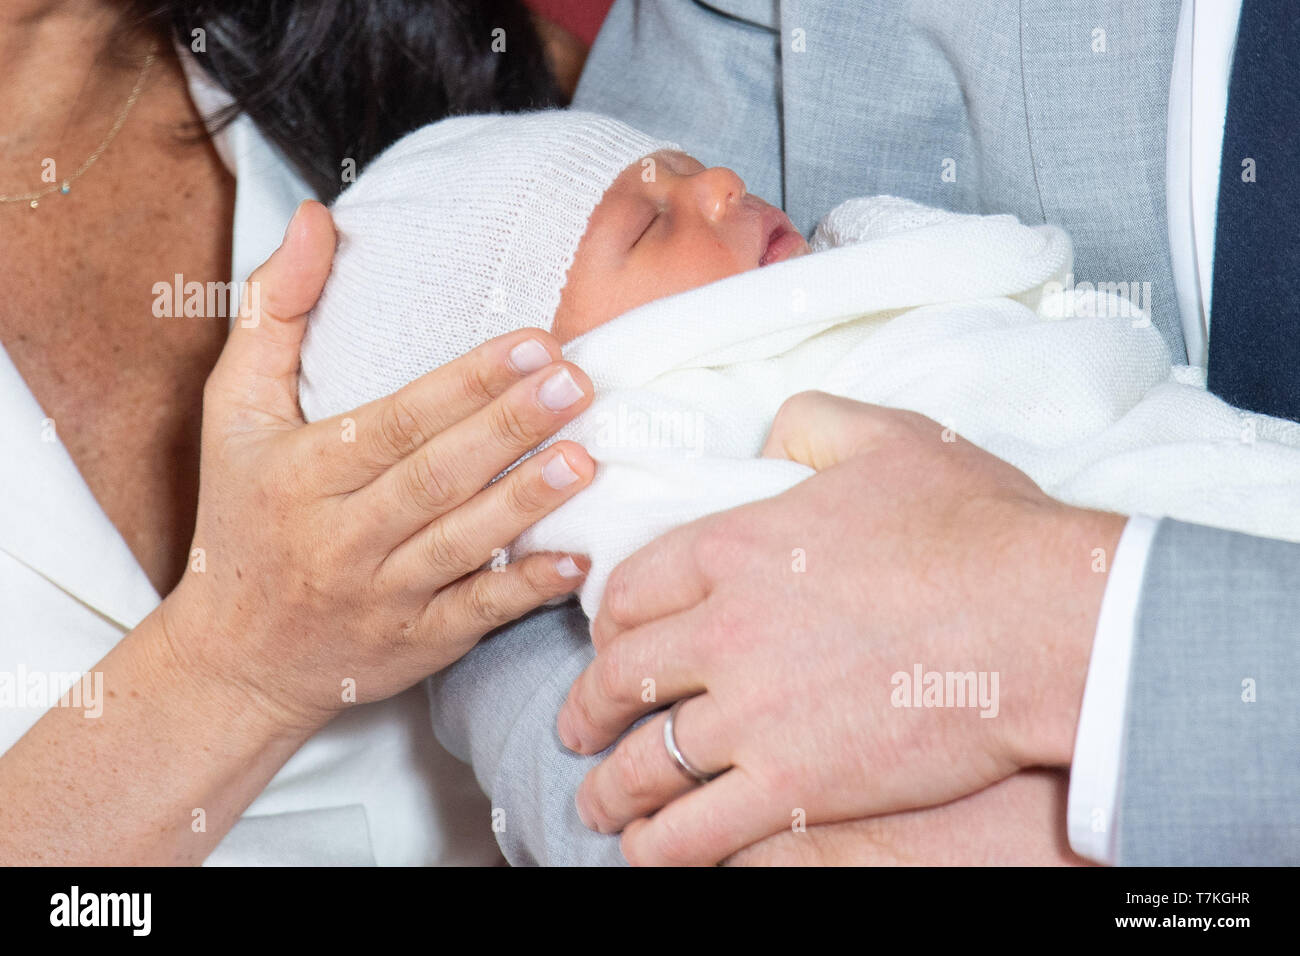 Windsor. 8th May, 2019. Photo taken on May 8, 2019 shows the son of Britain's Prince Harry, Duke of Sussex, and his wife Meghan Markle, Duchess of Sussex, in St George's Hall at Windsor Castle in Windsor, Britain. The baby boy, who is Queen Elizabeth's eighth great-grandchild, is seventh in line to the throne, behind the Prince of Wales, the Duke of Cambridge and his children - Prince George, Princess Charlotte and Prince Louis - and Prince Harry. Credit: Dominic Lipinski/PA Wire/Xinhua/Alamy Live News Stock Photo